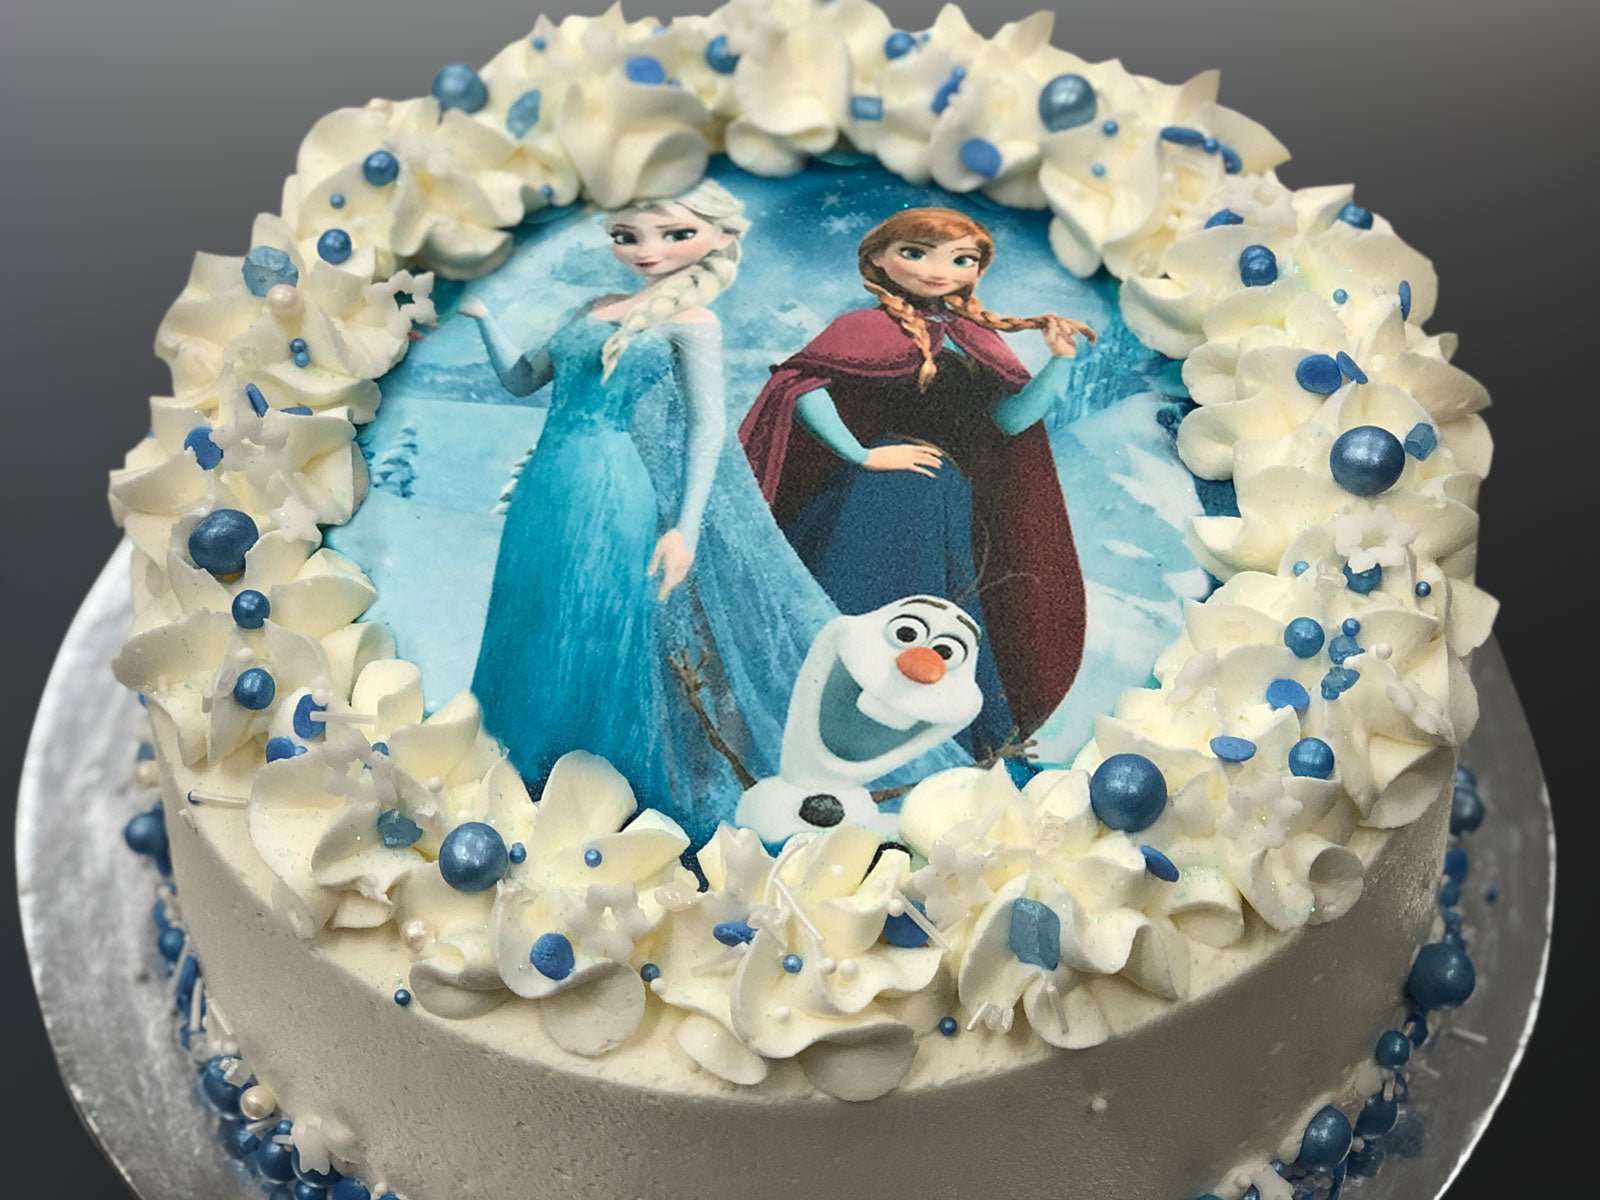 Frozen Anna and Elsa Birthday Cakes London | Cakes by Robin